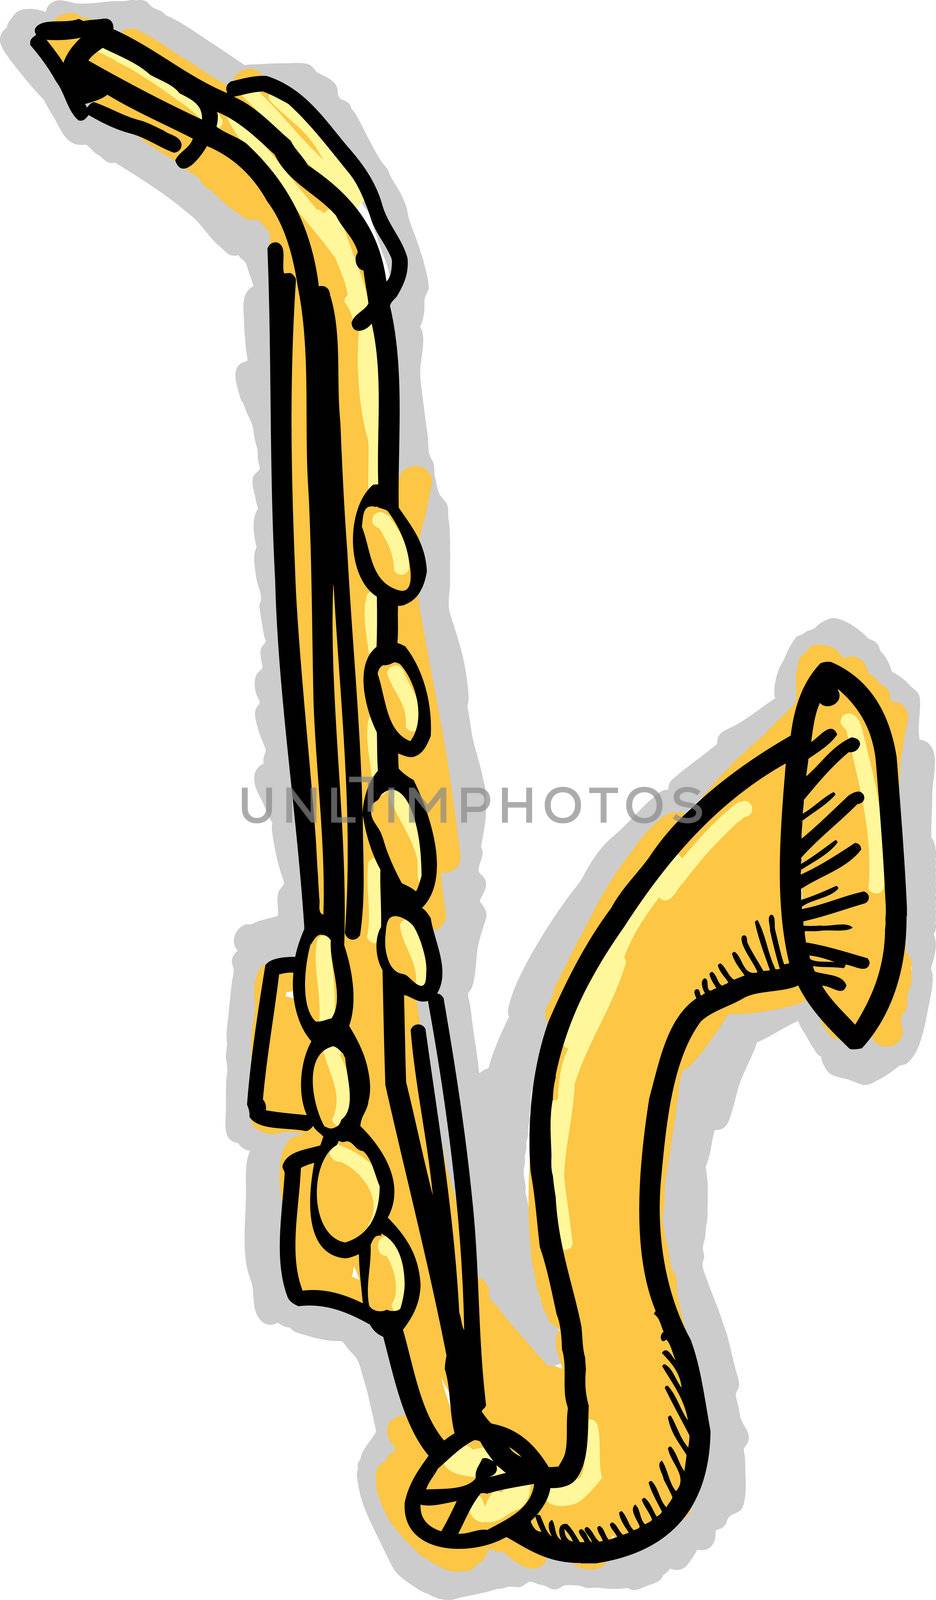 Doodle drawing of a saxaphone with sound coming from it